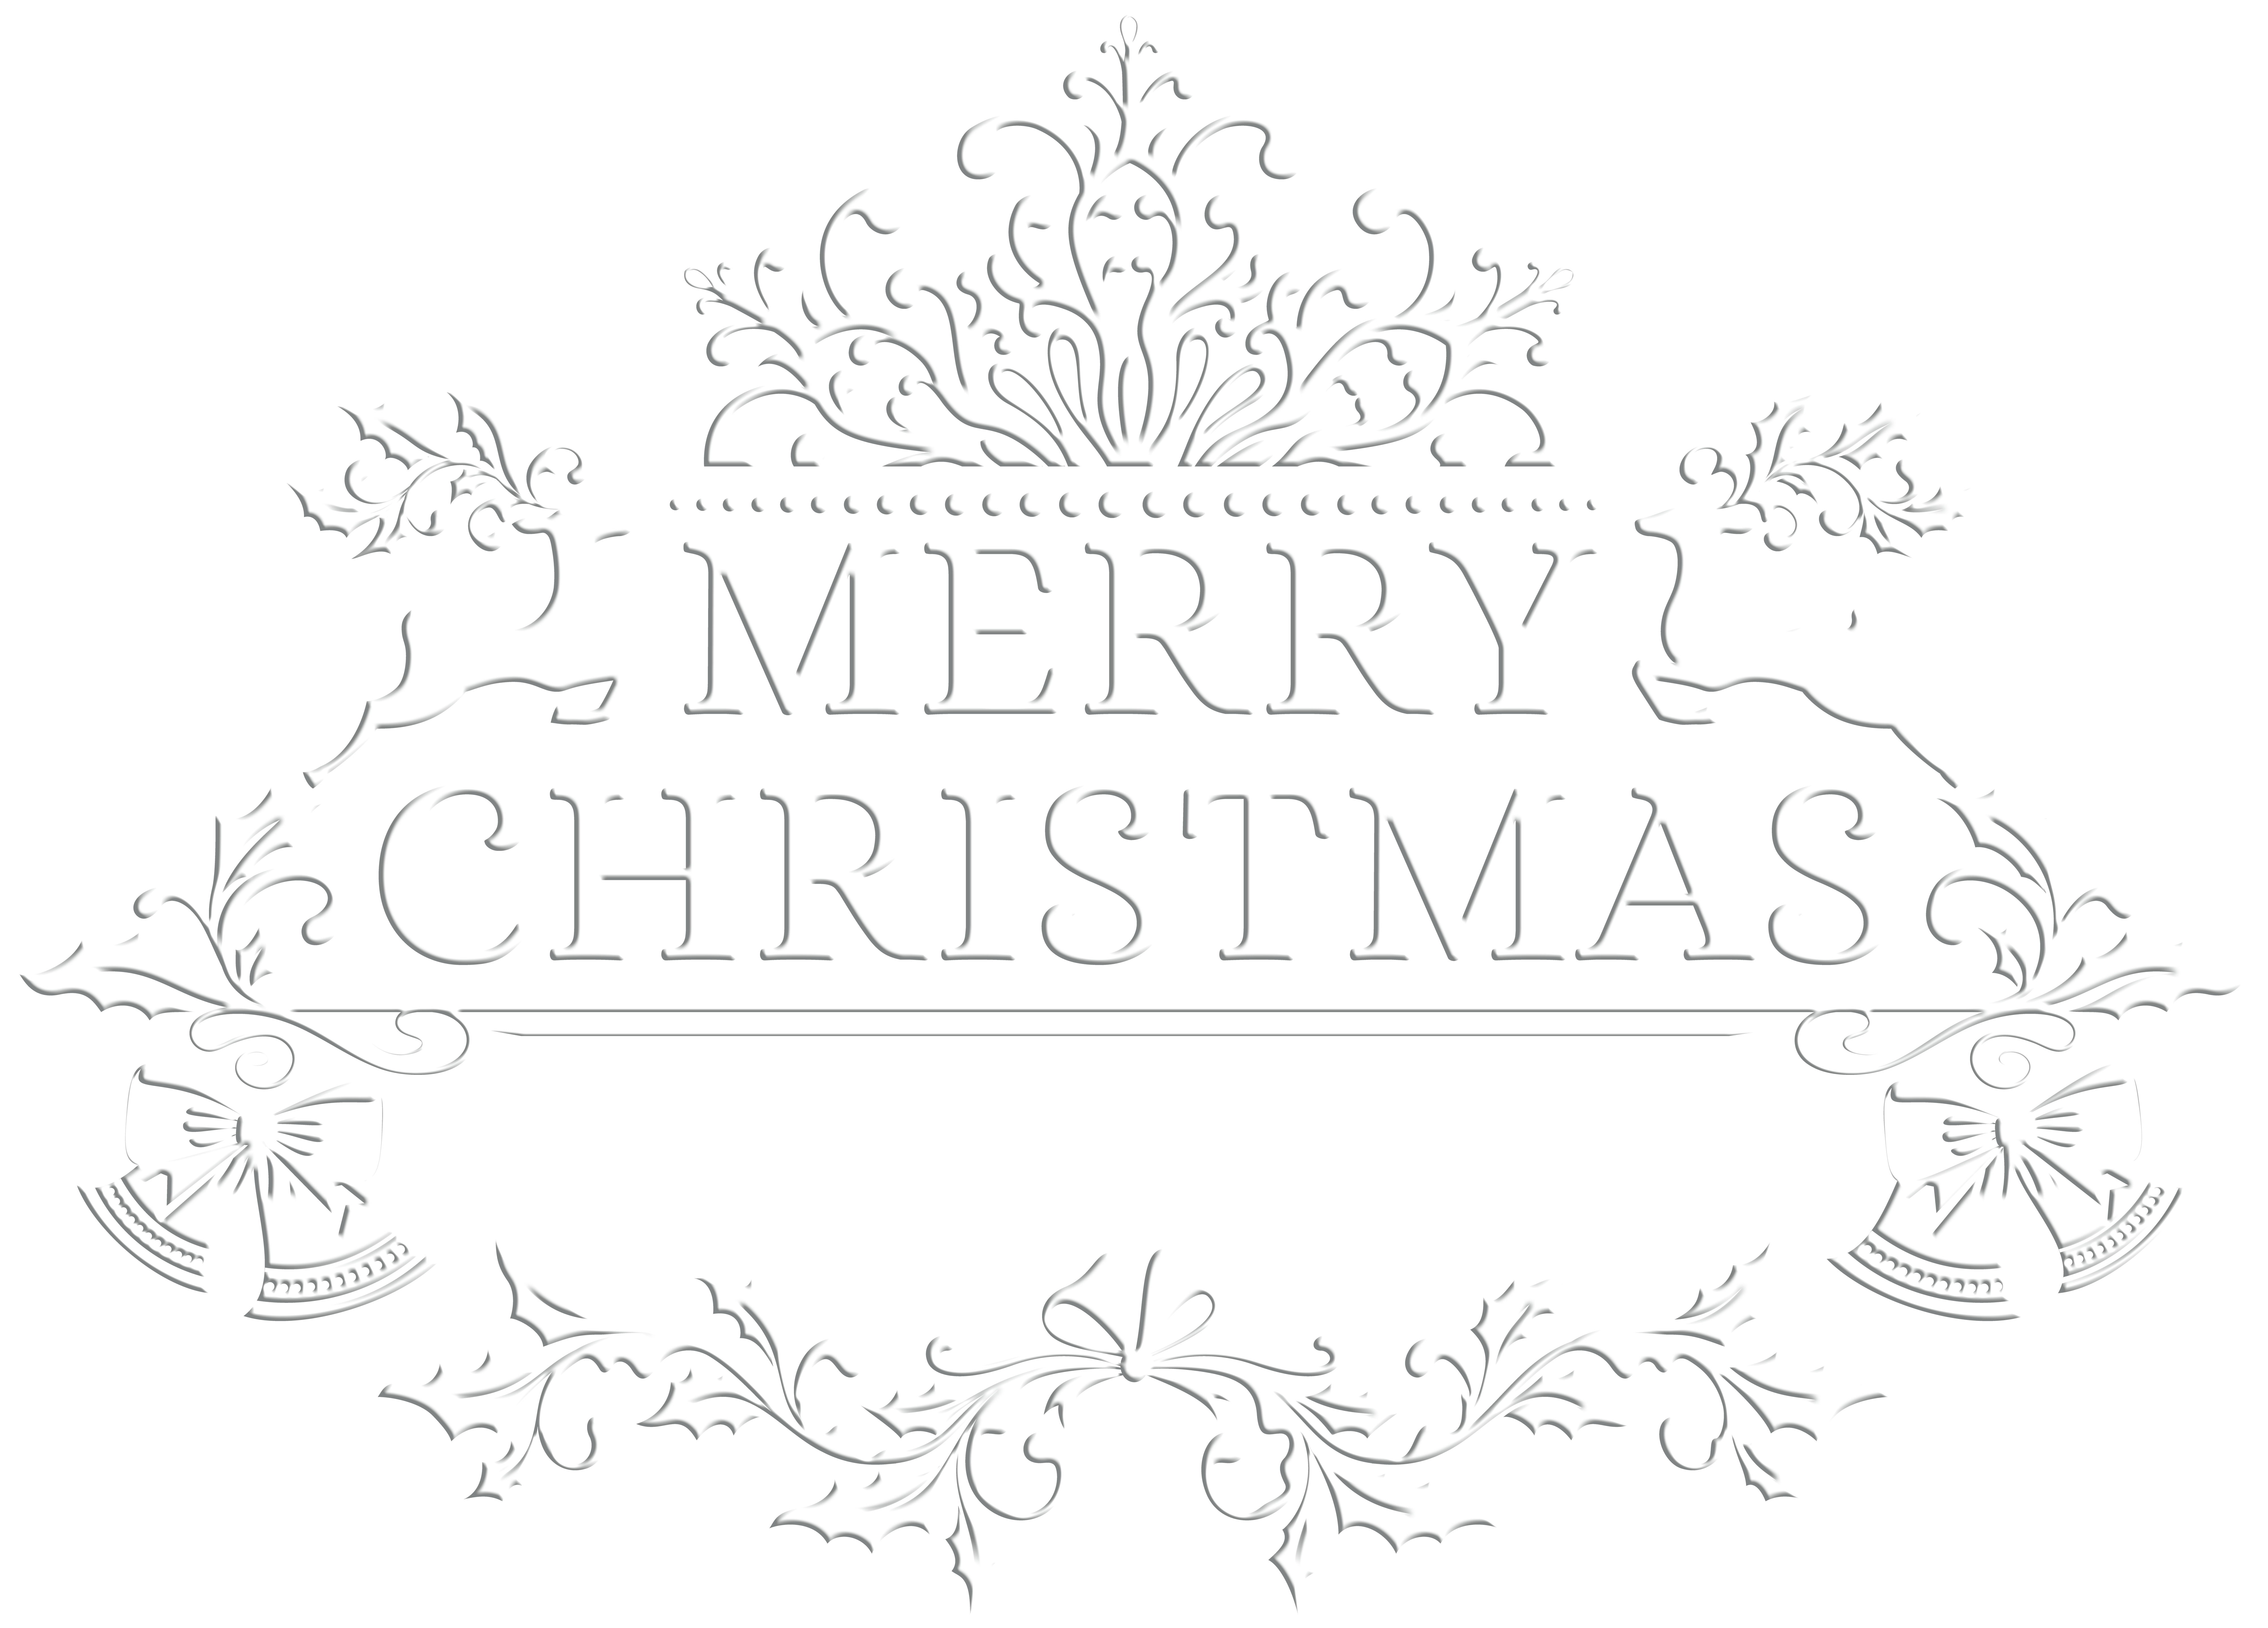 Merry Christmas White Transparent PNG Clip Art Image​ | Gallery  Yopriceville - High-Quality Free Images and Transparent PNG Clipart